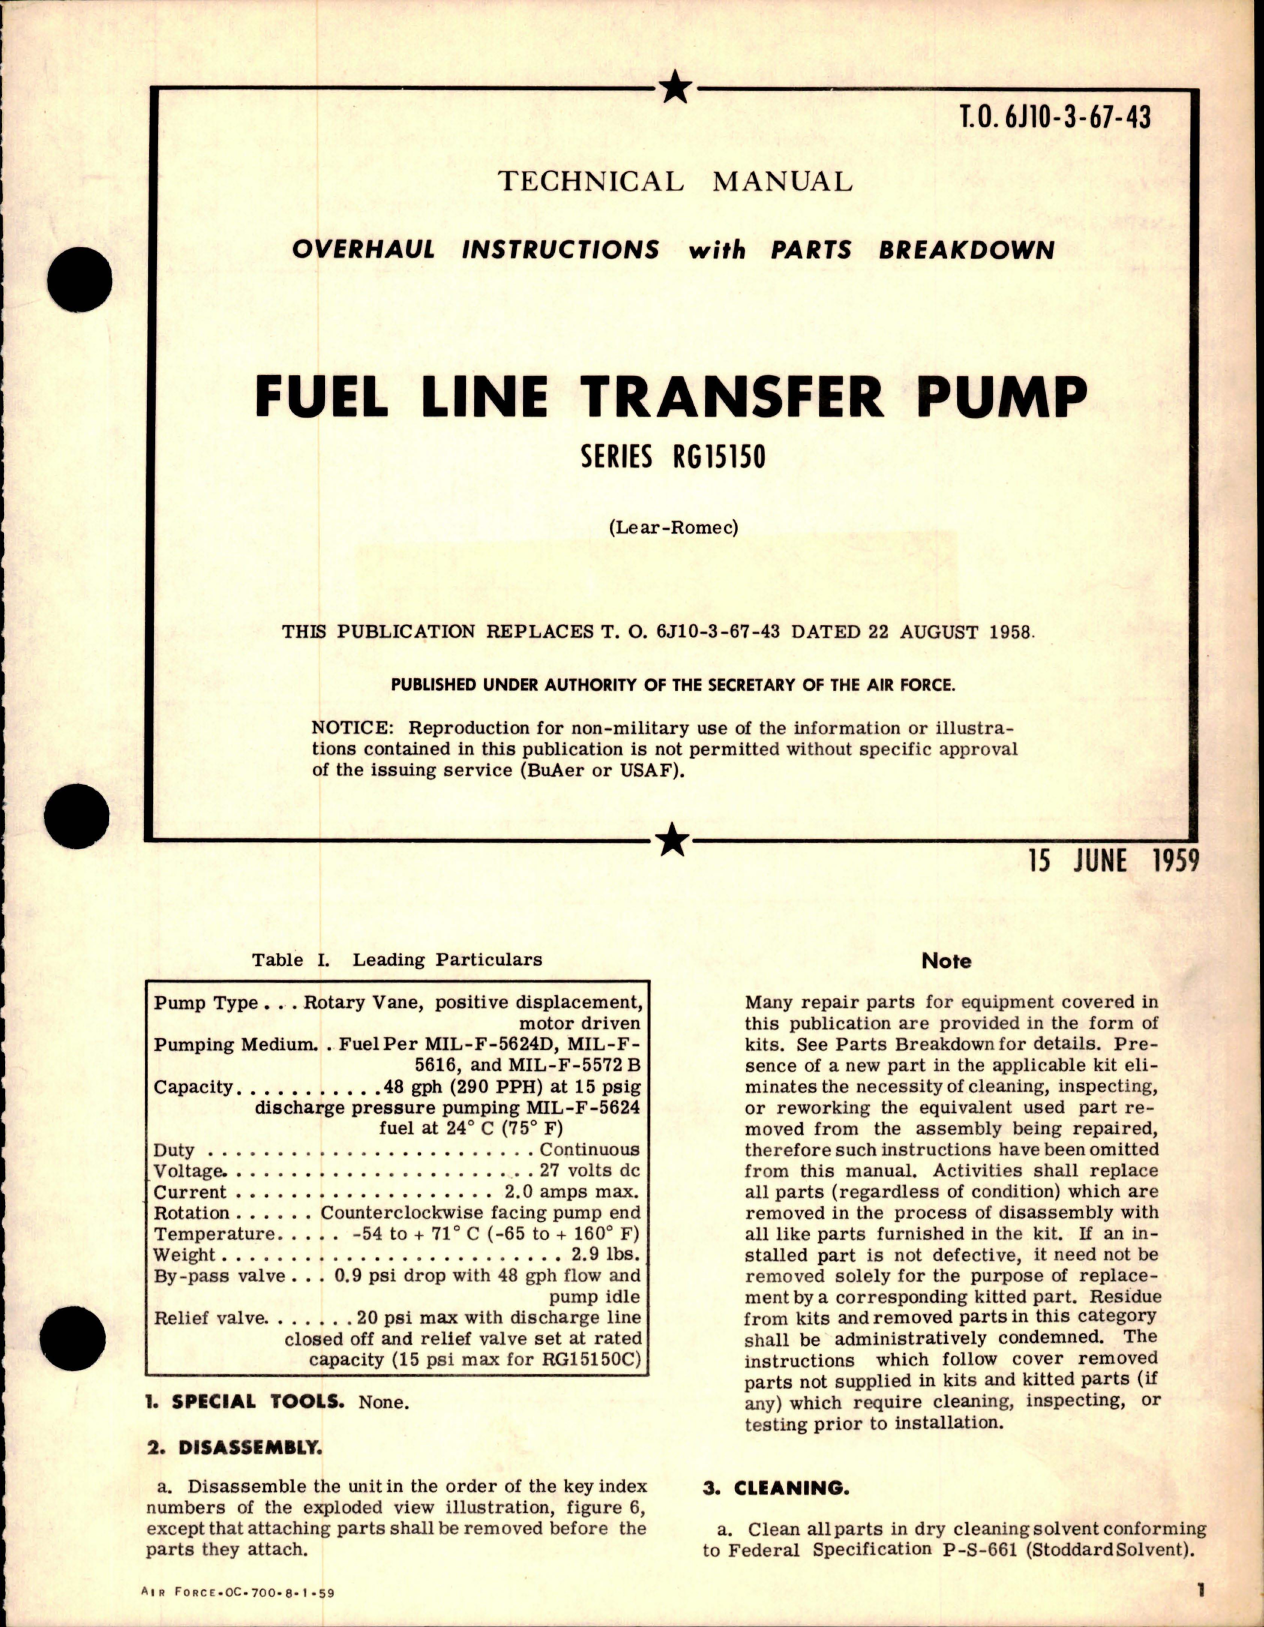 Sample page 1 from AirCorps Library document: Overhaul Instructions w Parts Breakdown for Fuel Line Transfer Pump - Series RG15150 